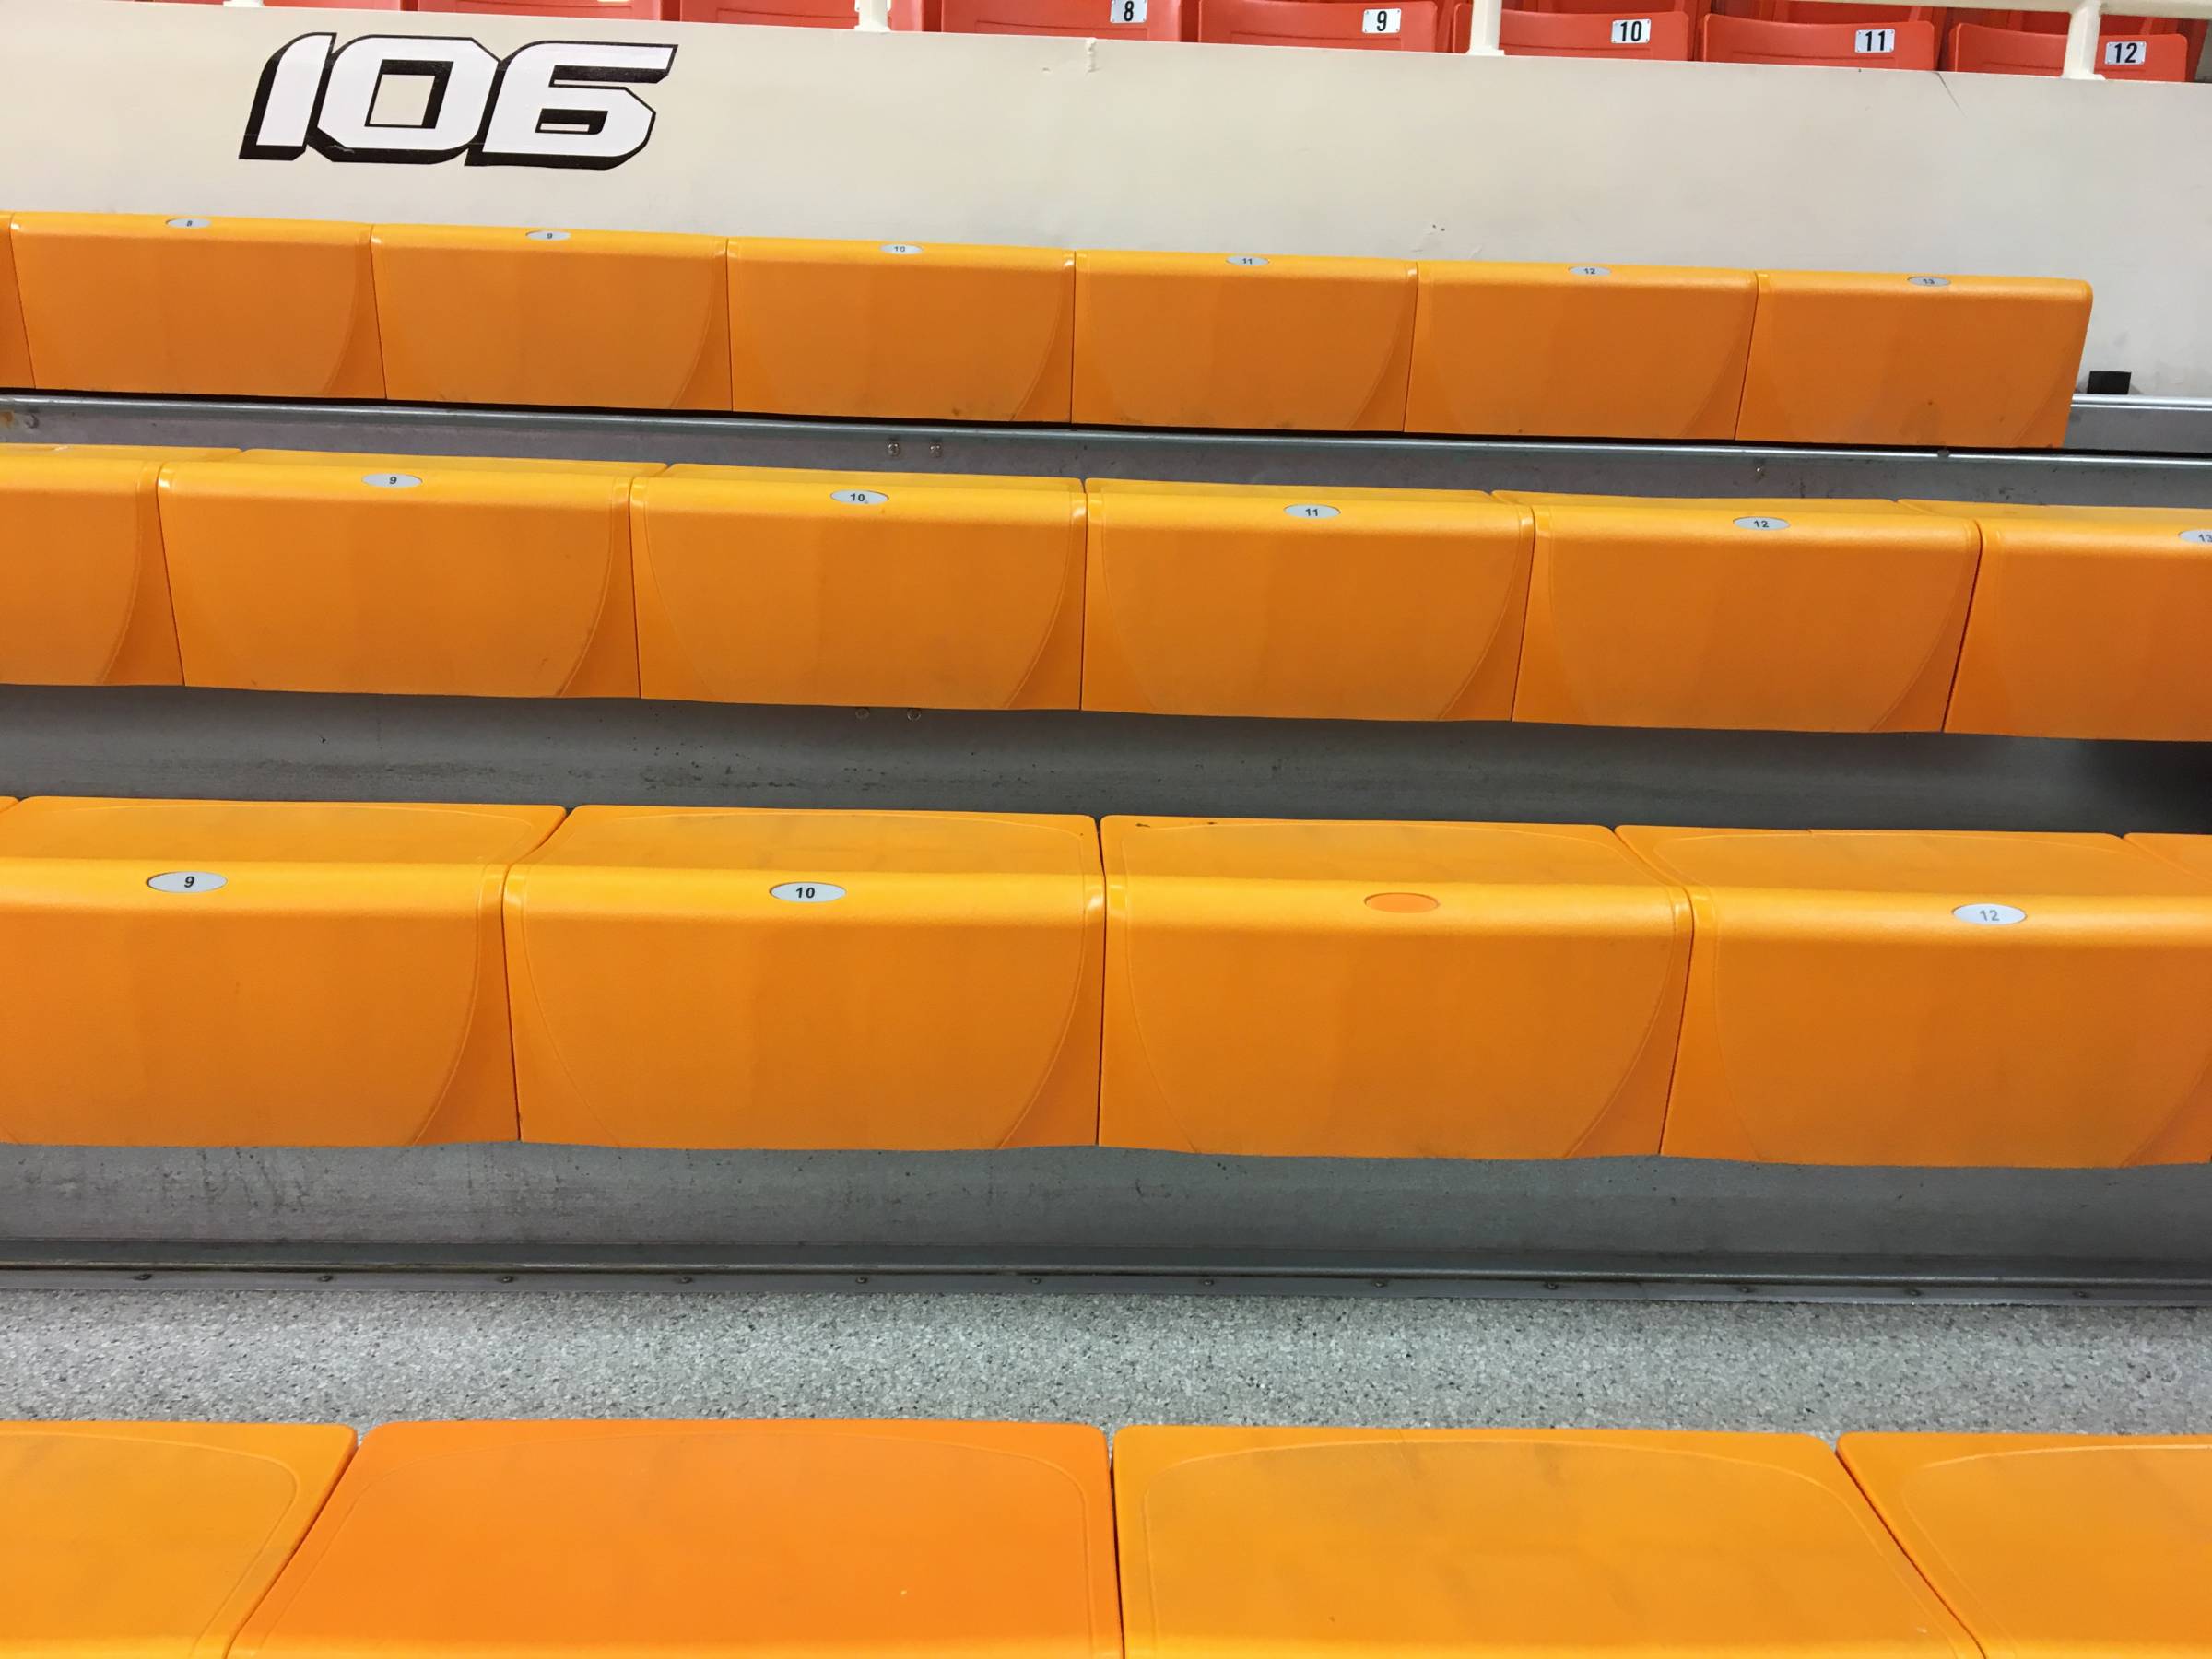 Baseline Bleachers at Gallagher-Iba Arena